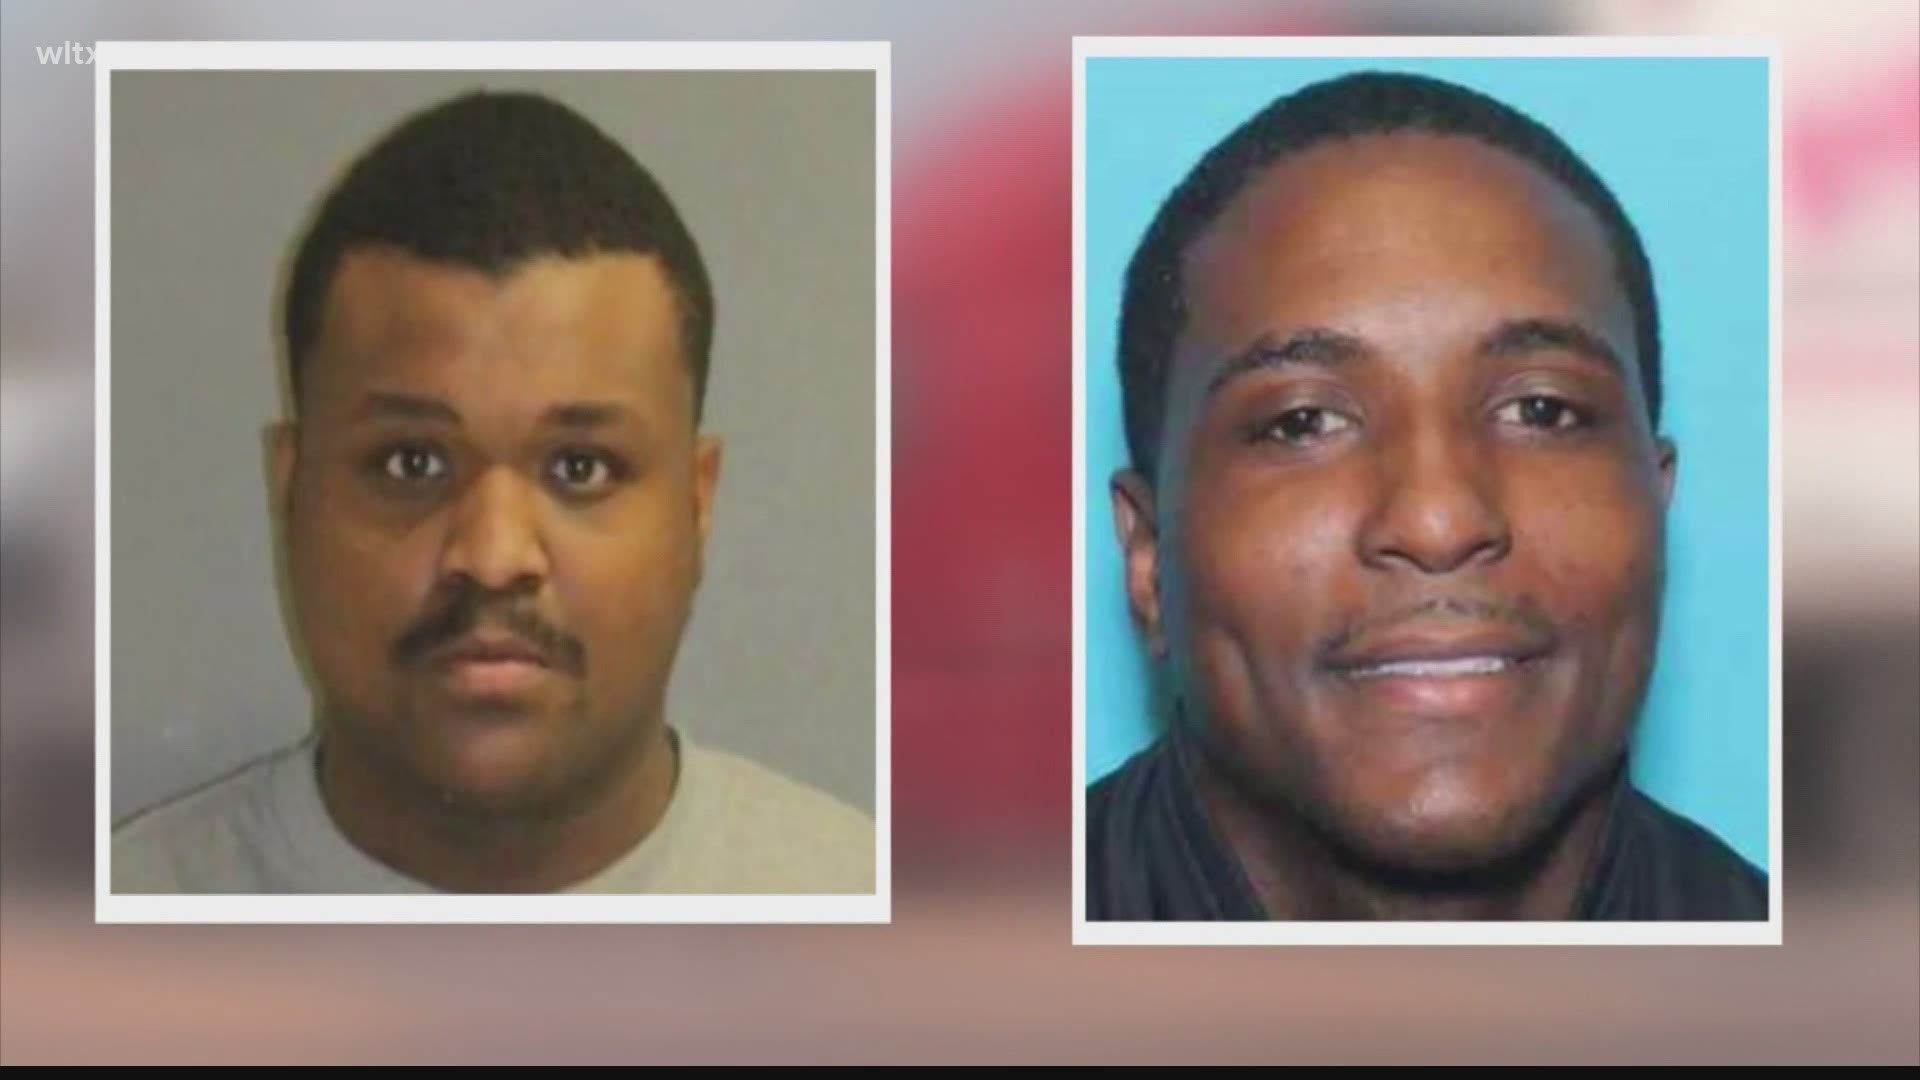 The FBI is seeking potential victims and information about two truck drivers, one of whom is from SC, who allegedly kidnapped women and held them for ransom.